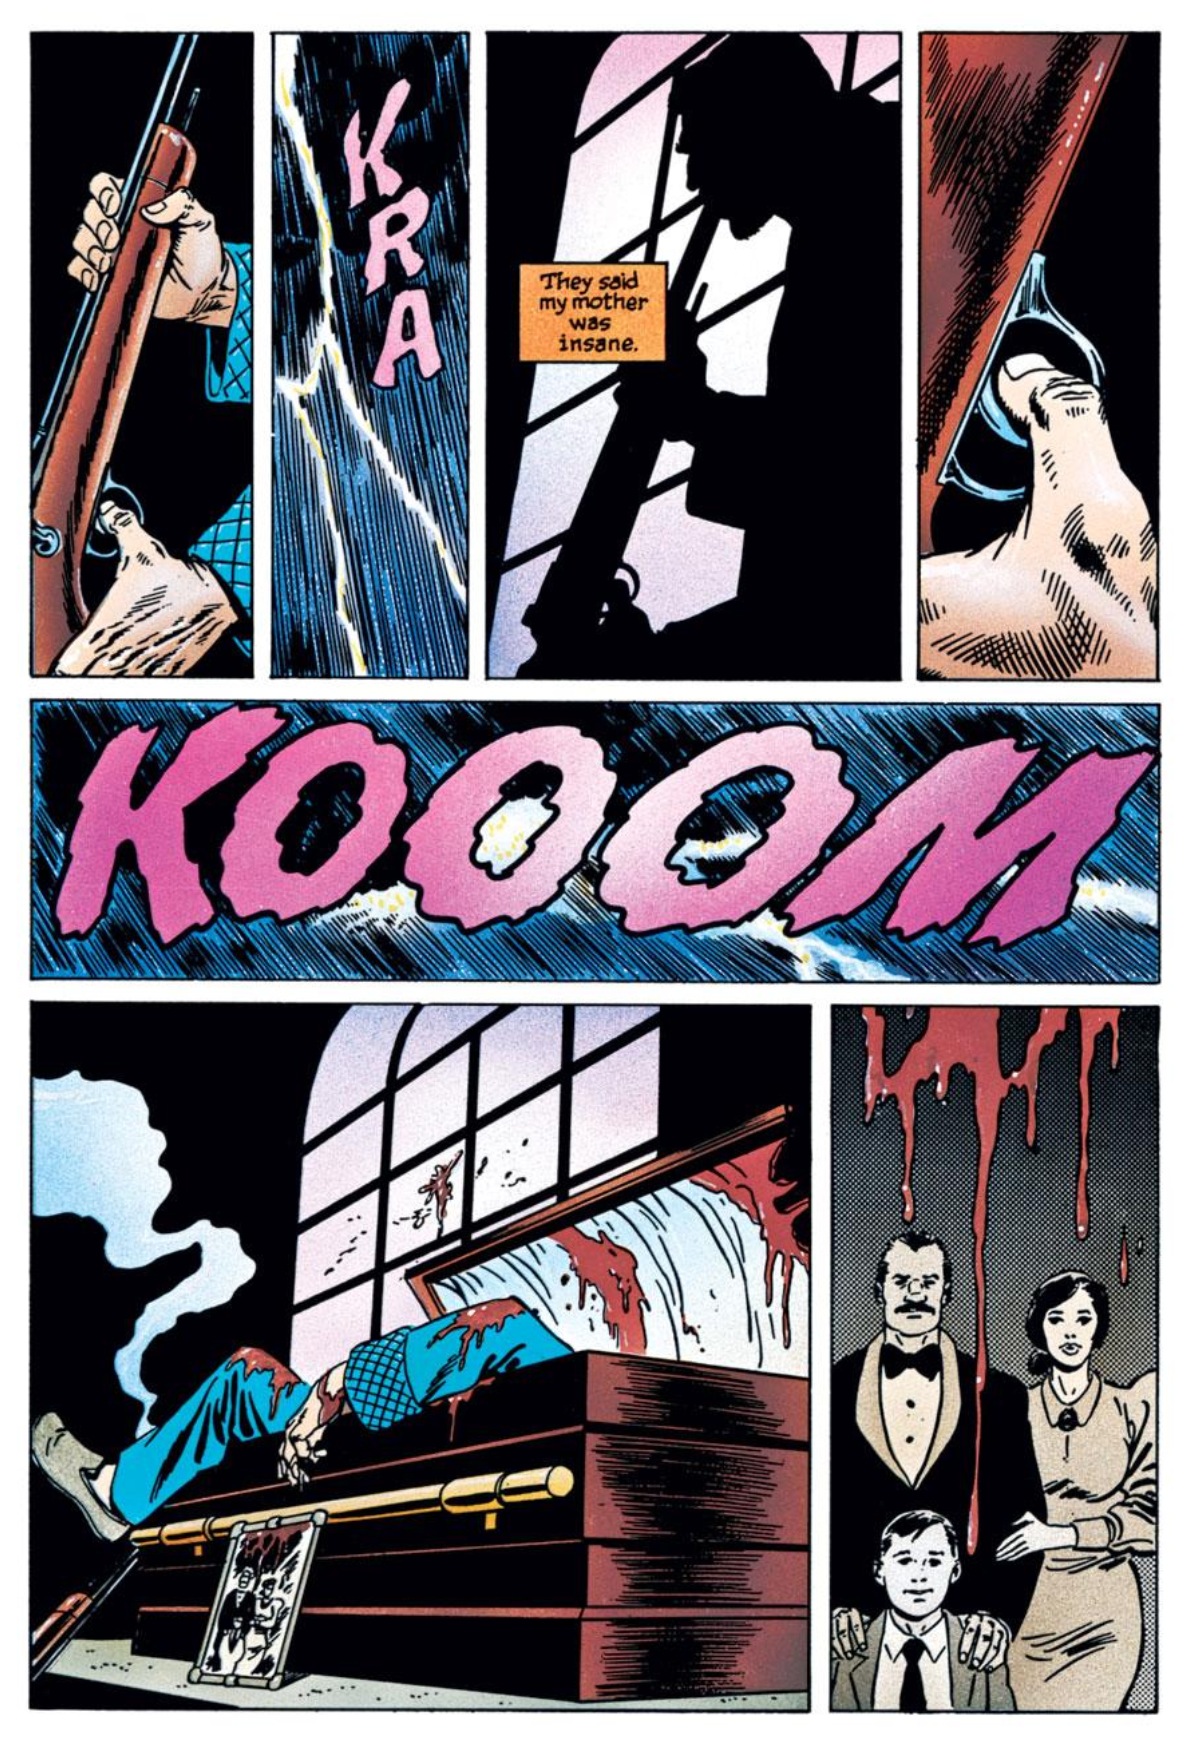 Kraven’s Last Hunt (Part II): The Will to Live and Die